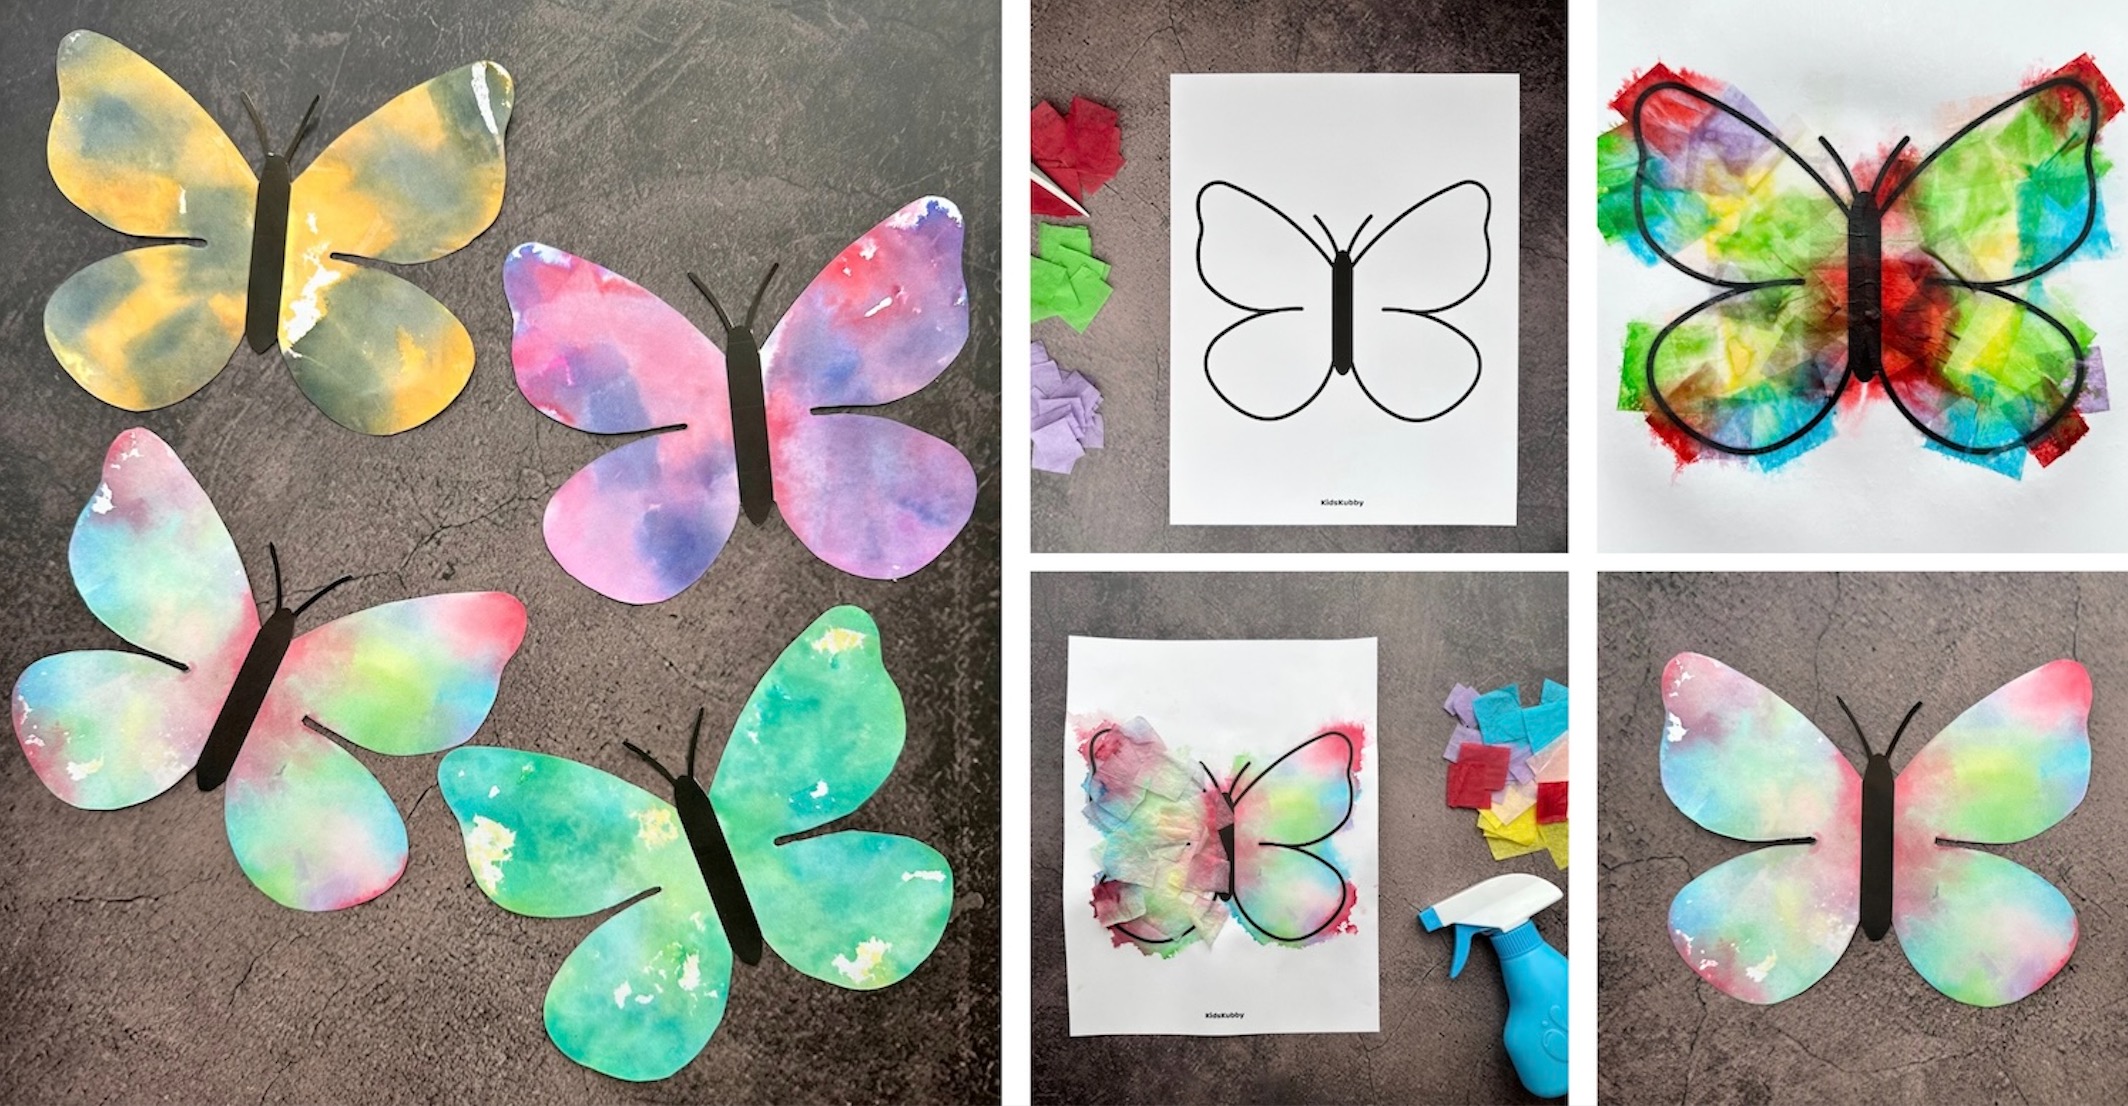 Easy paper art project using tissue paper and water! Simply spray and transfer color to paper that looks like watercolor. This fun and easy craft is perfect for kids of all ages especially preschoolers and kindergarteners.